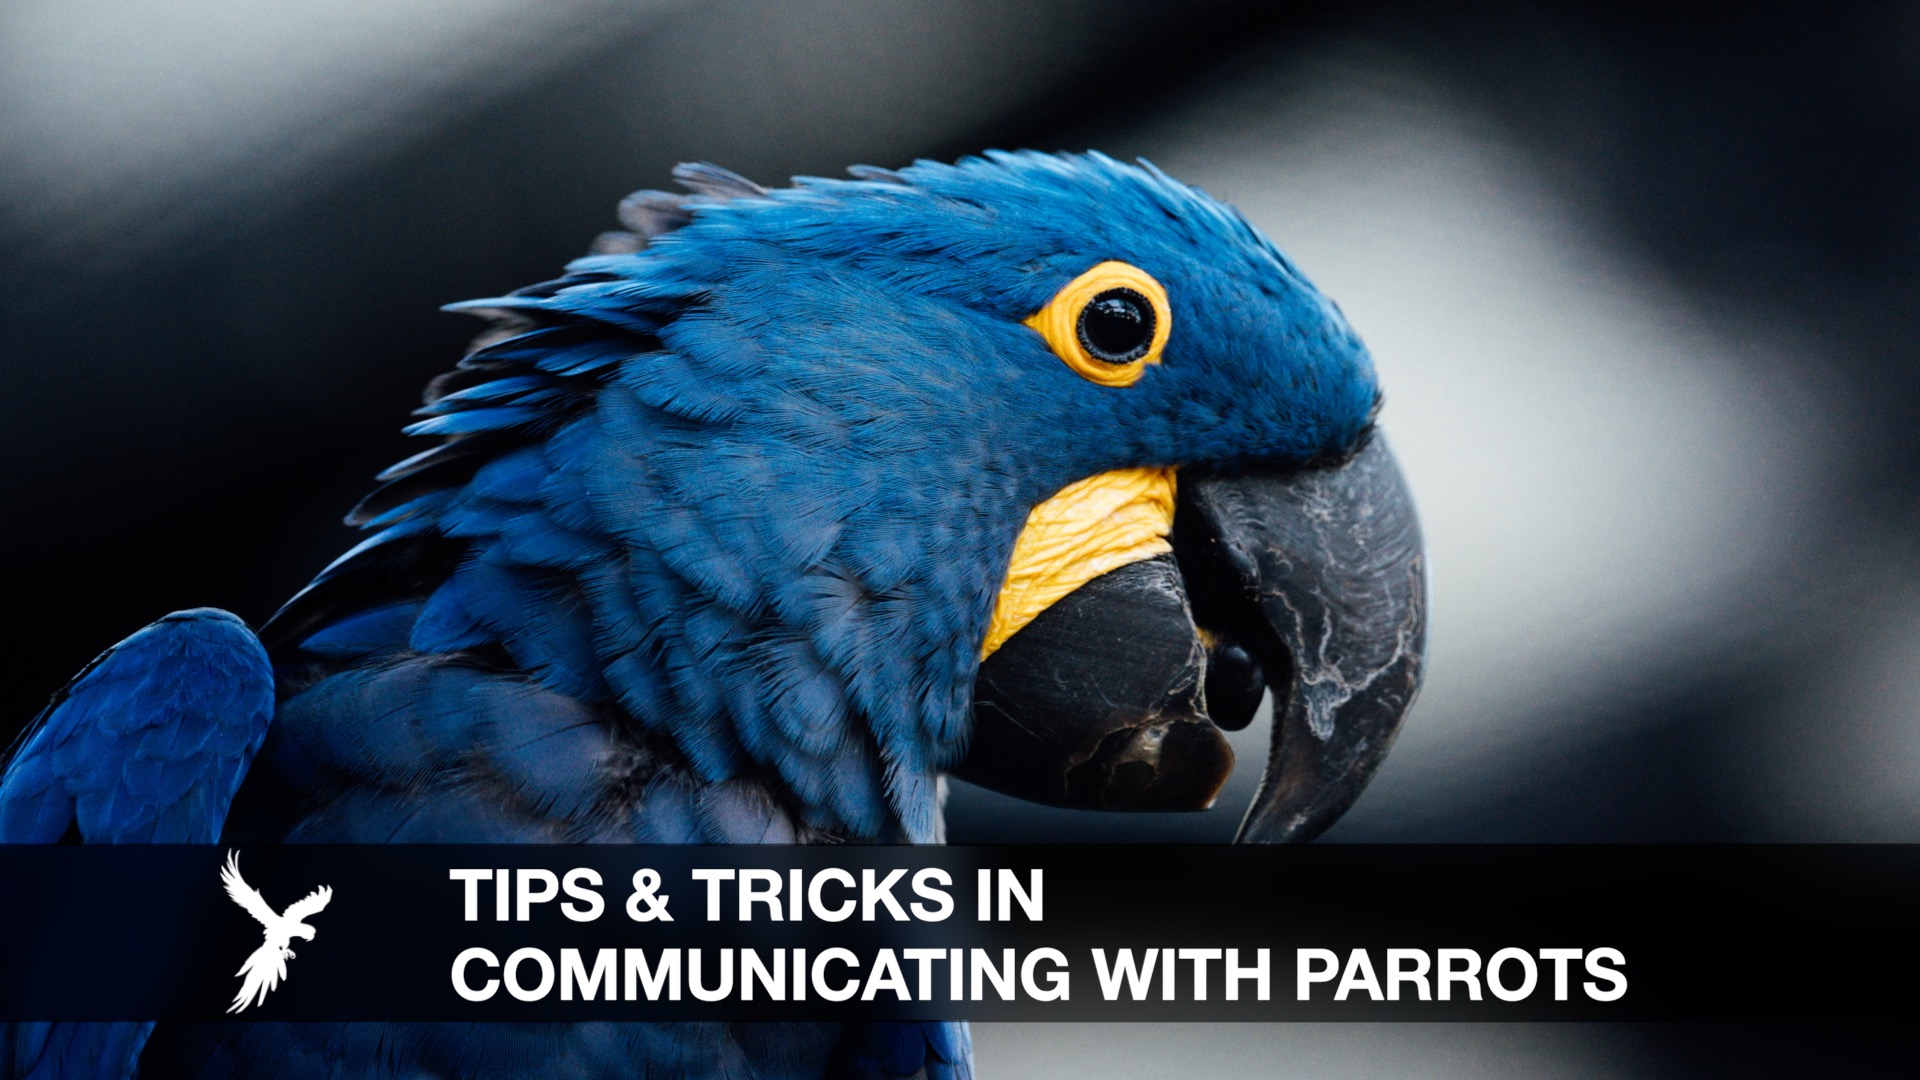 A TRAINERS SECRETS IN COMMUNICATING WITH PARROTS